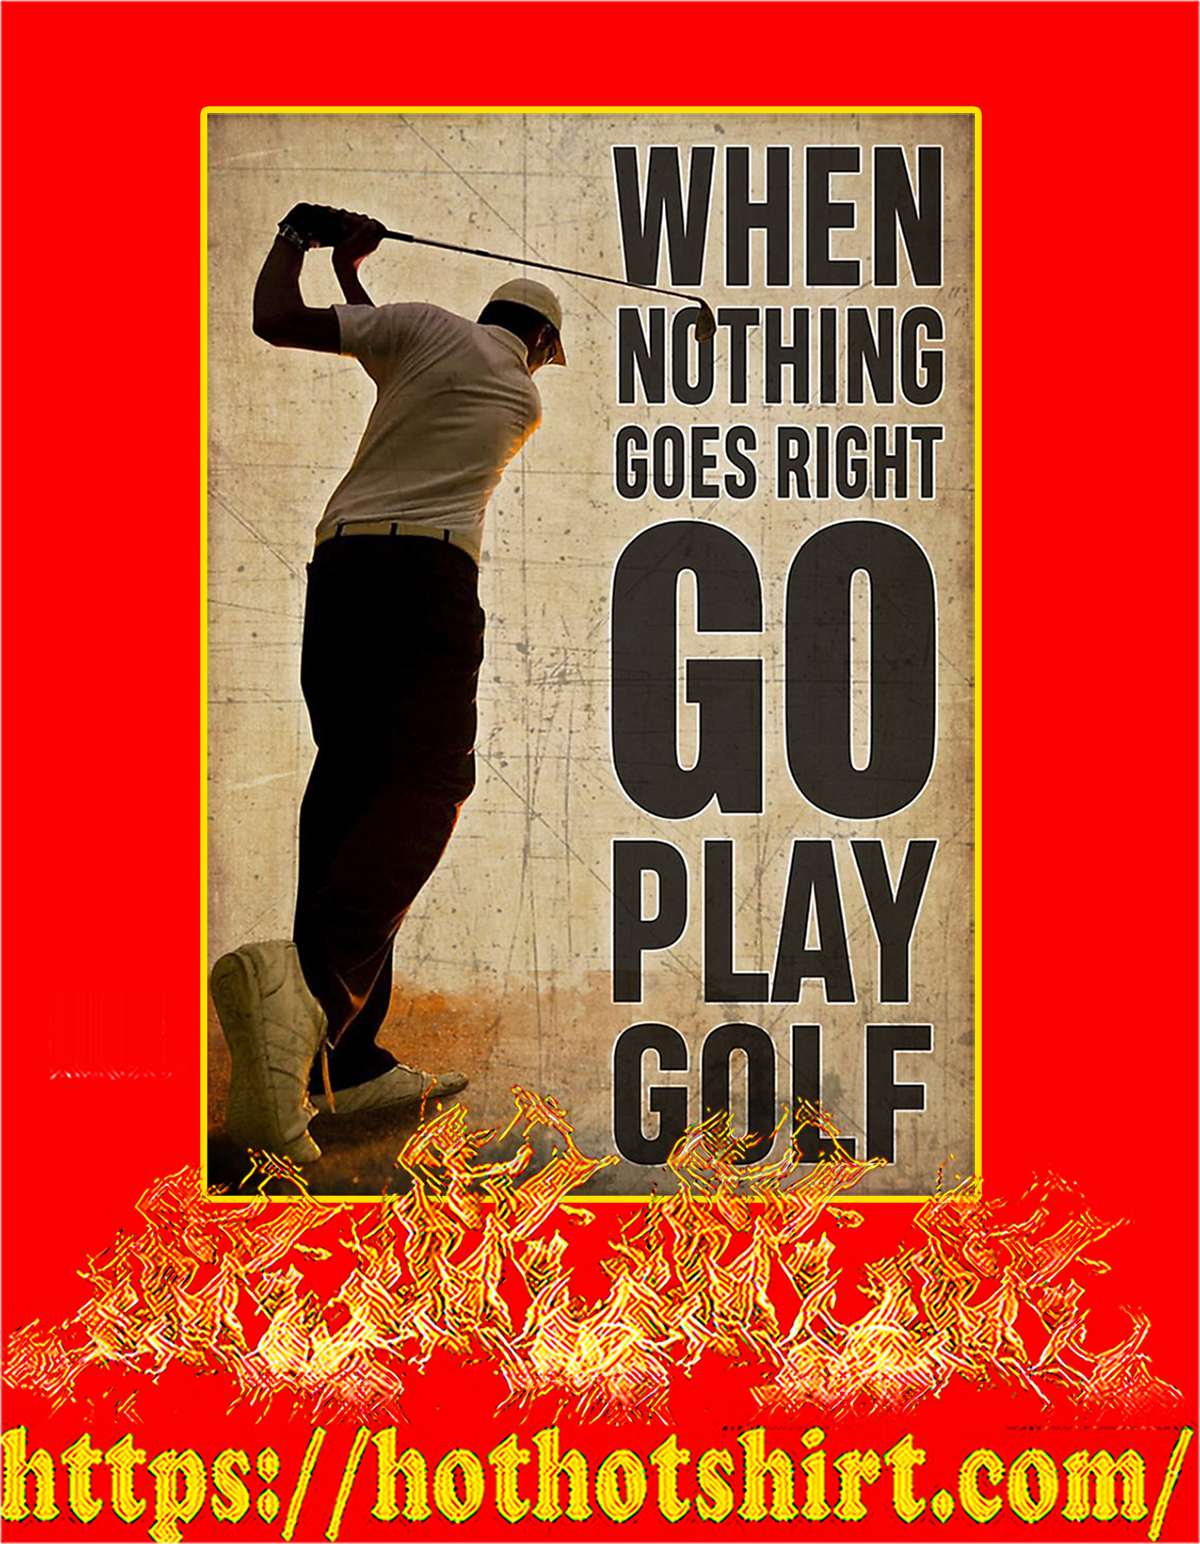 When nothing goes right go play golf poster